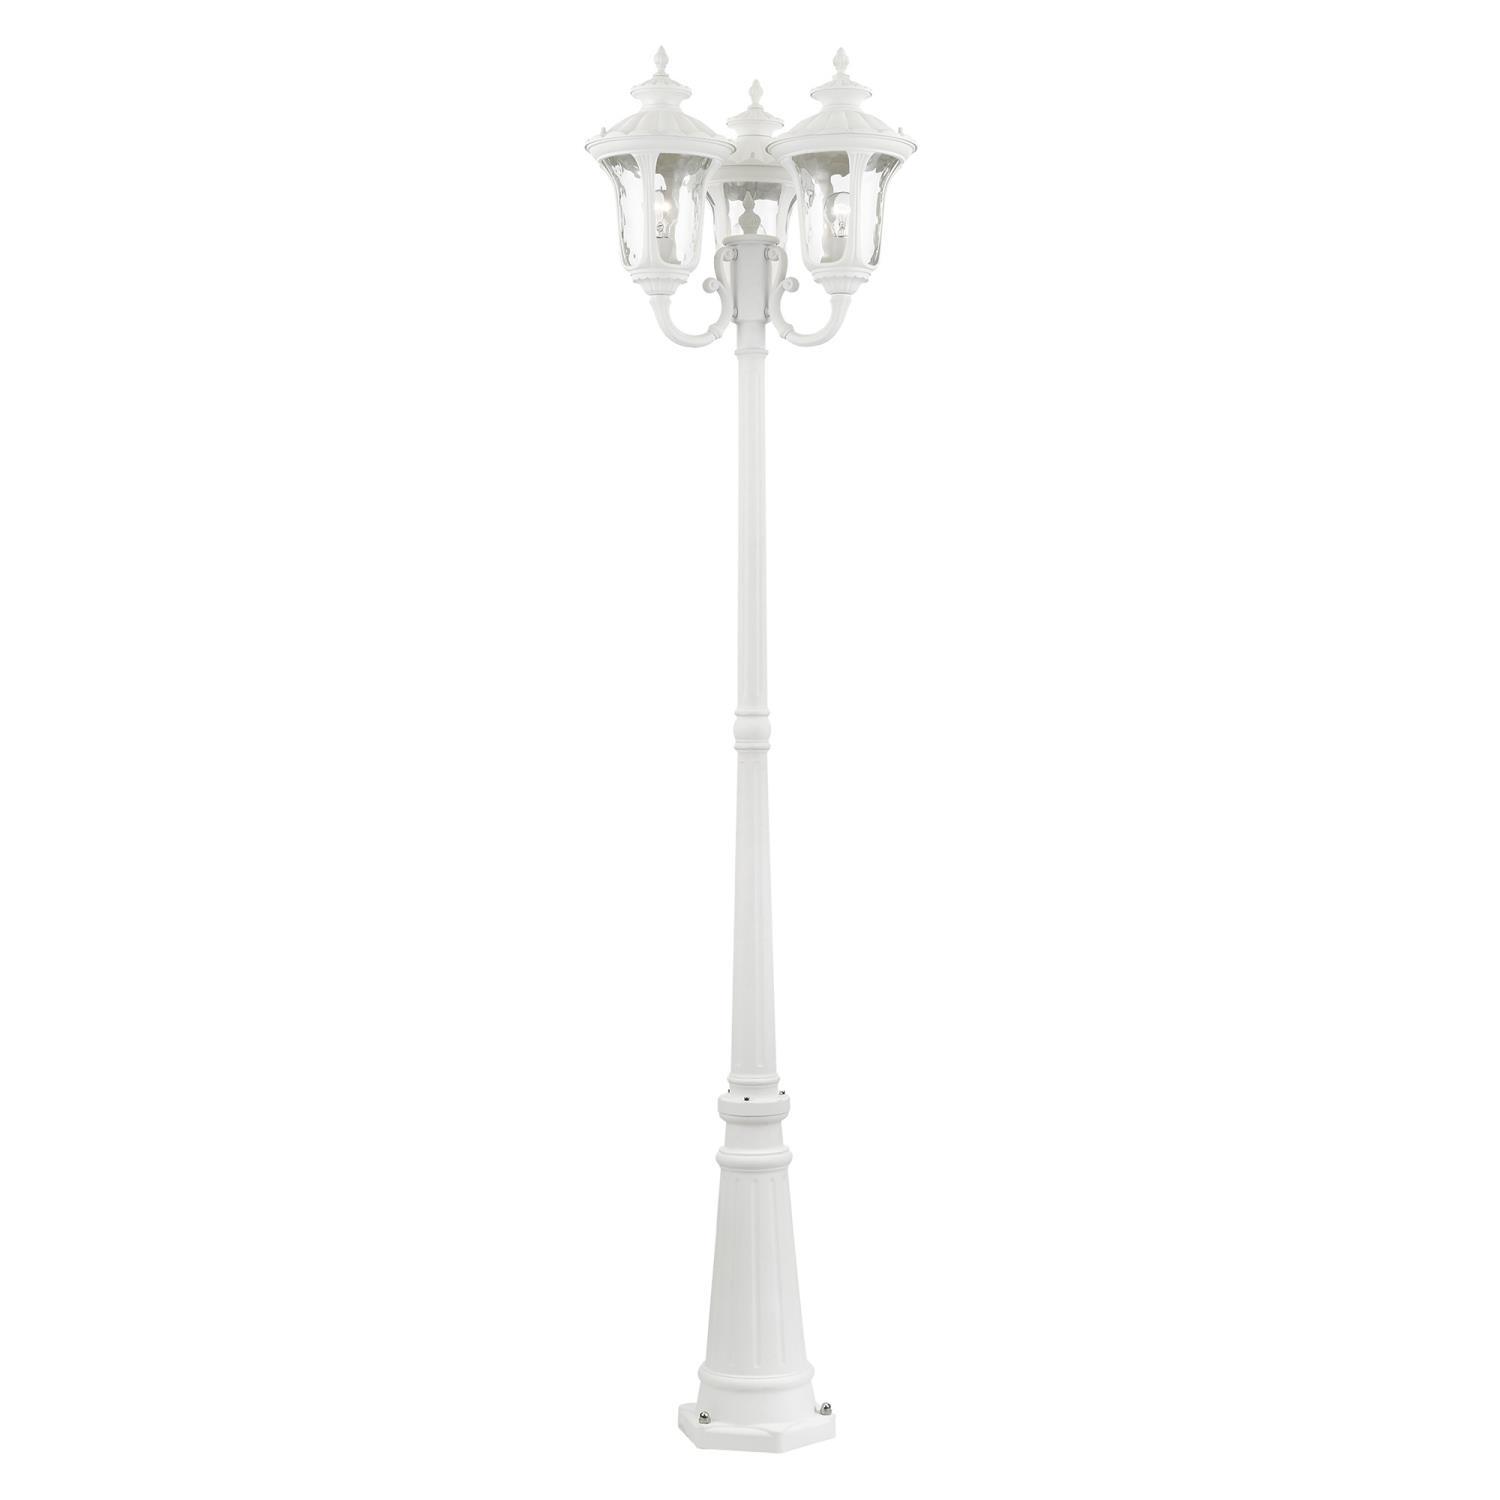 Livex Lighting 3 Light Outdoor Post Light With Textured White Finish 7866-13 - image 5 of 7